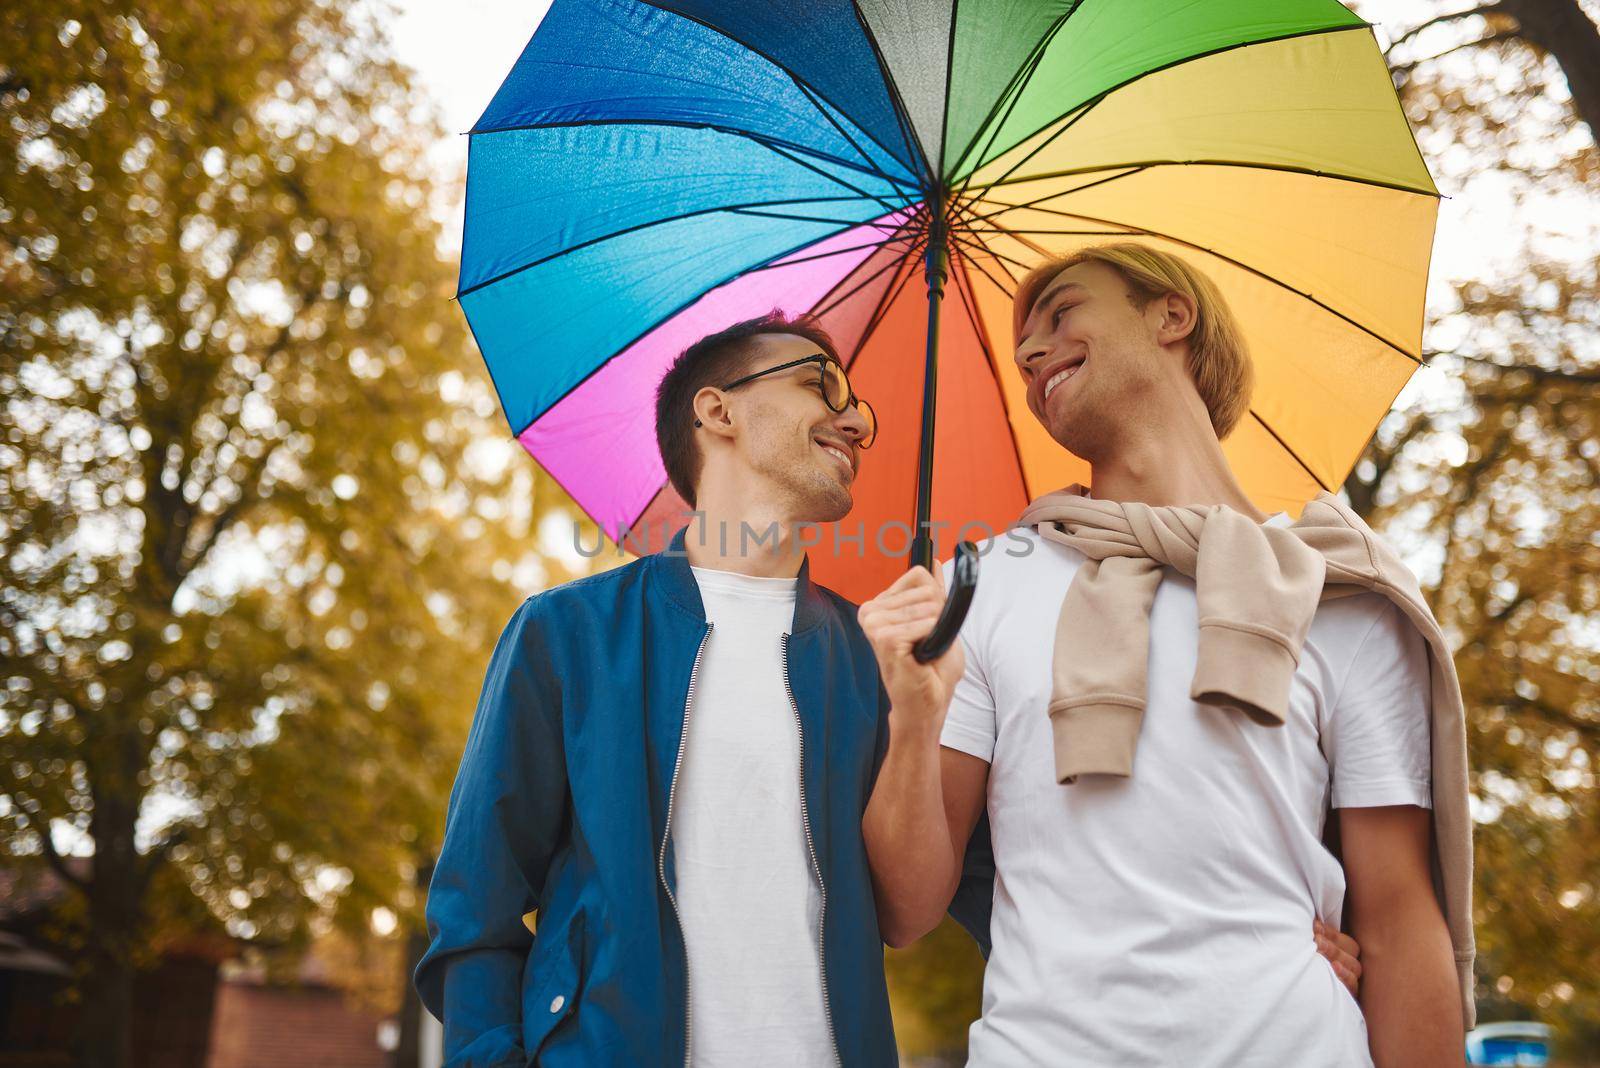 Loving gay couple walking outdoors with rainbow umbrella. Two handsome men having romantic date in park. LGBT concept.